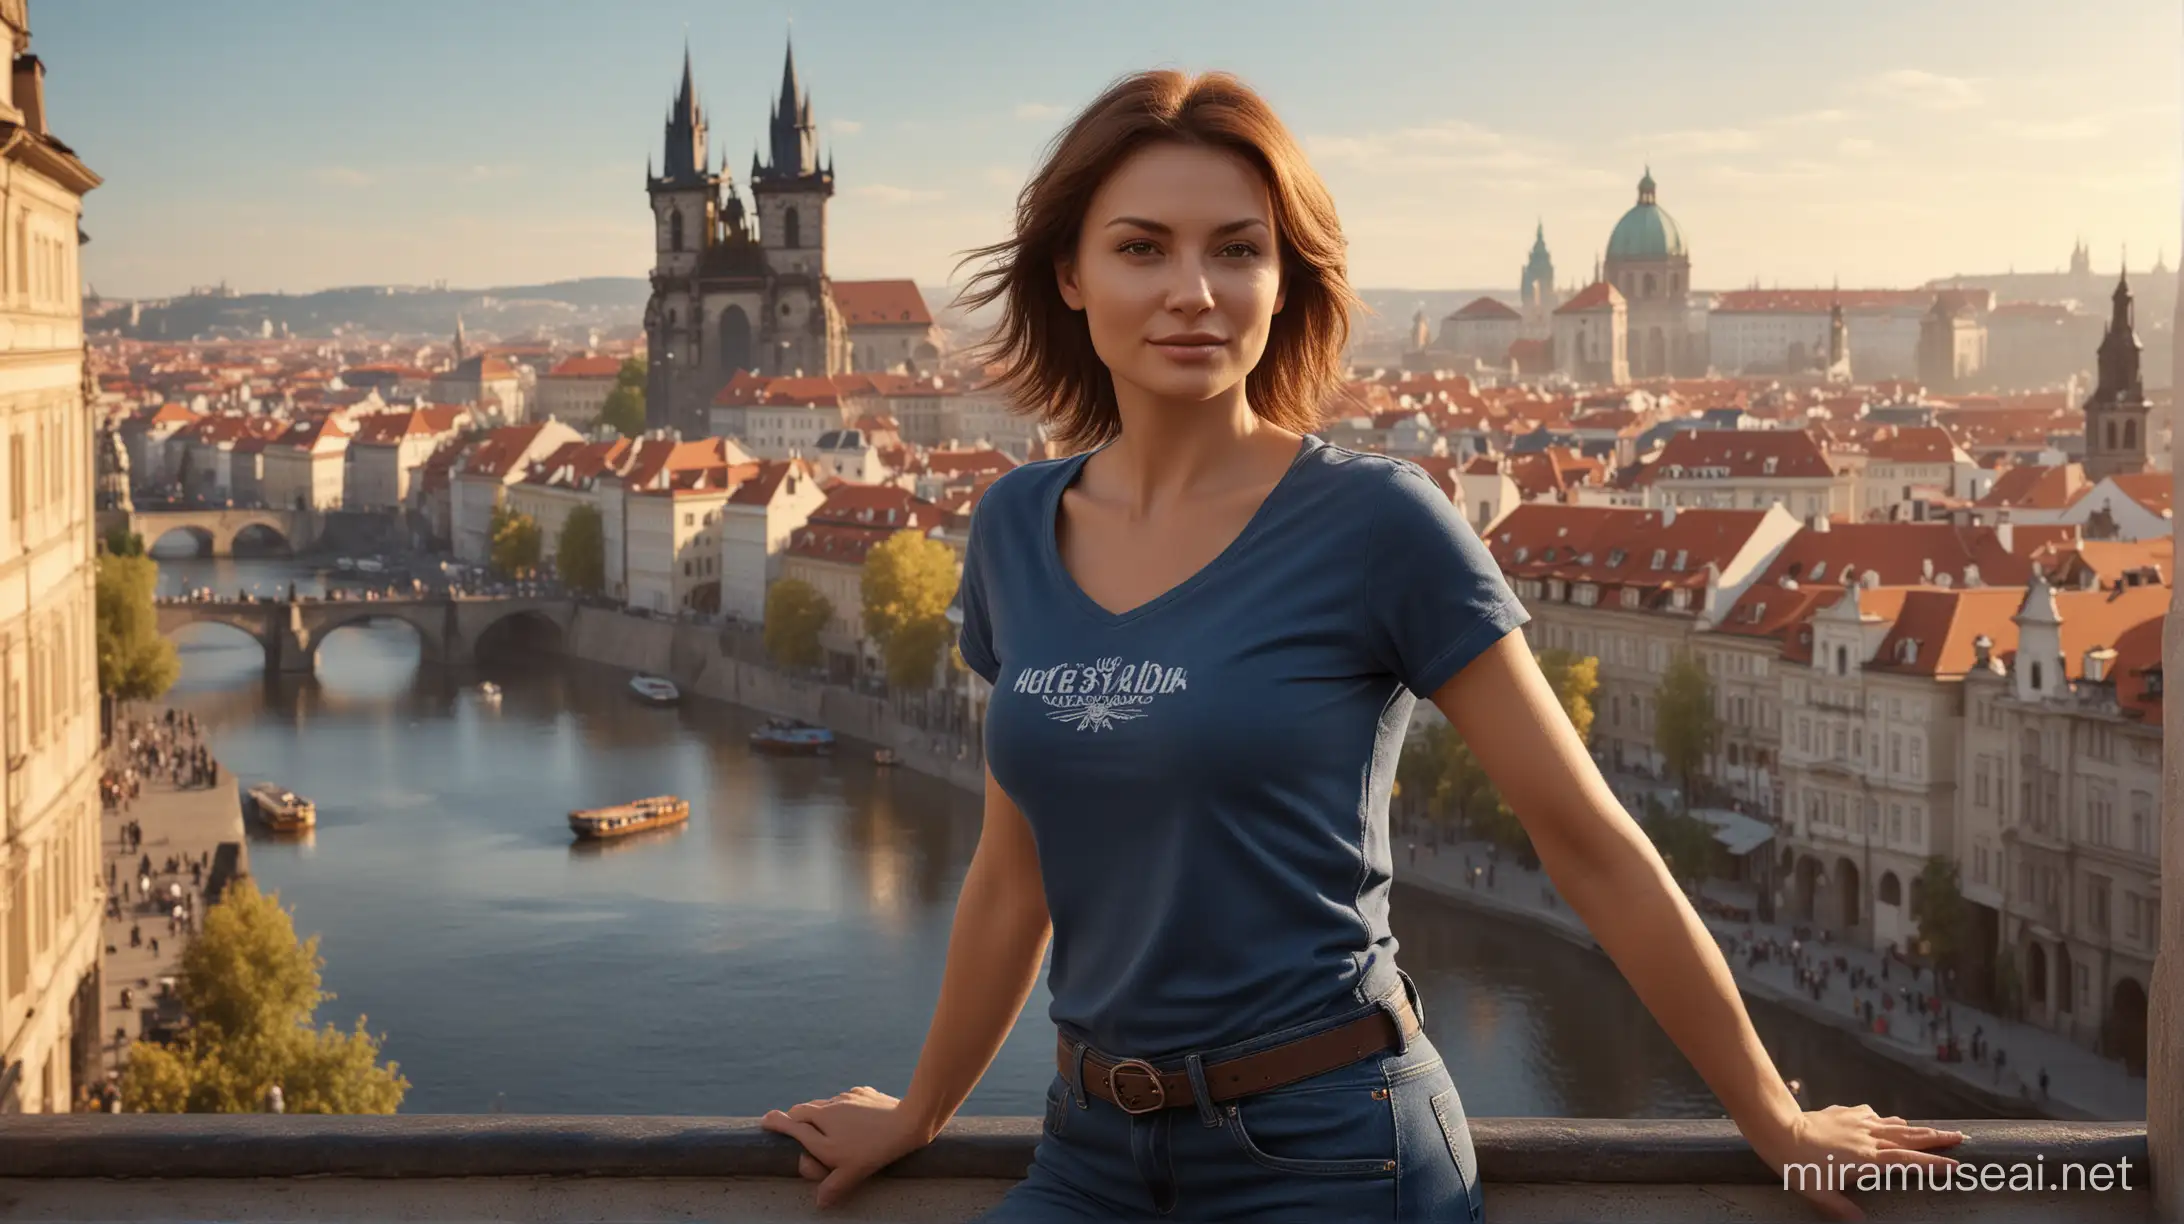 A stunning cinematic 3D render of a 40-year-old Slavic woman, with short brown hair, standing in the heart of Prague. She is wearing blue jeans and quality expensive black t shirt, The atmosphere of the image is lively and energetic, with the sun casting a warm, golden glow over the scene., cinematic, photo, 3d render, 3d render, photo, cinematic